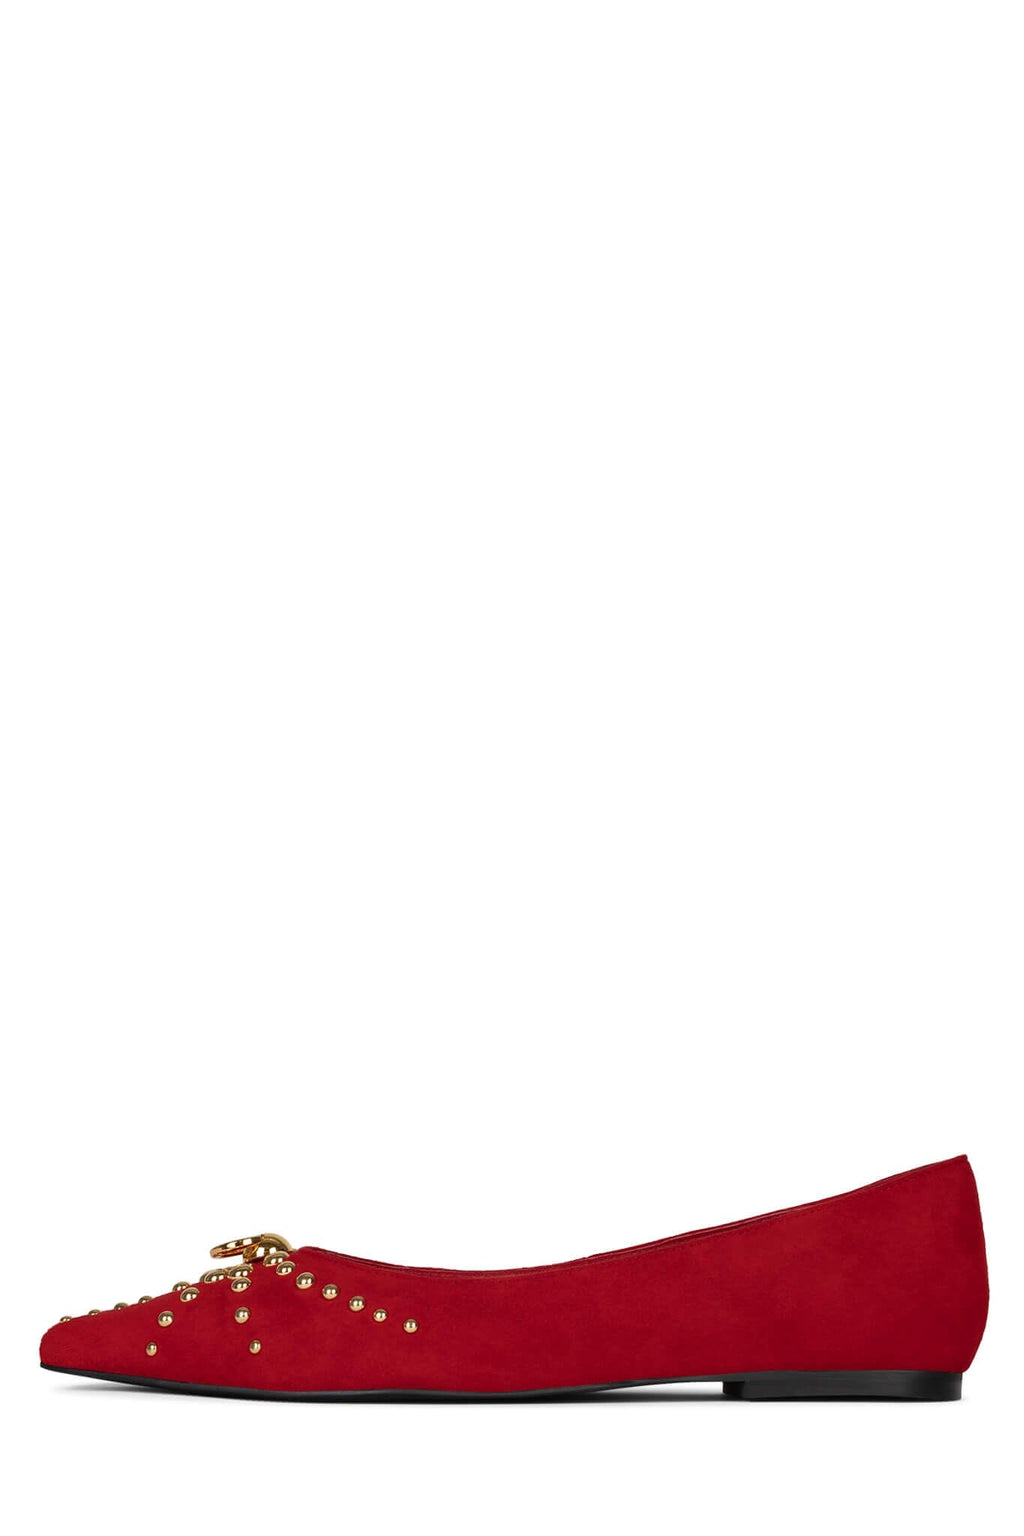 APPEALING DV Red Suede Gold 6 